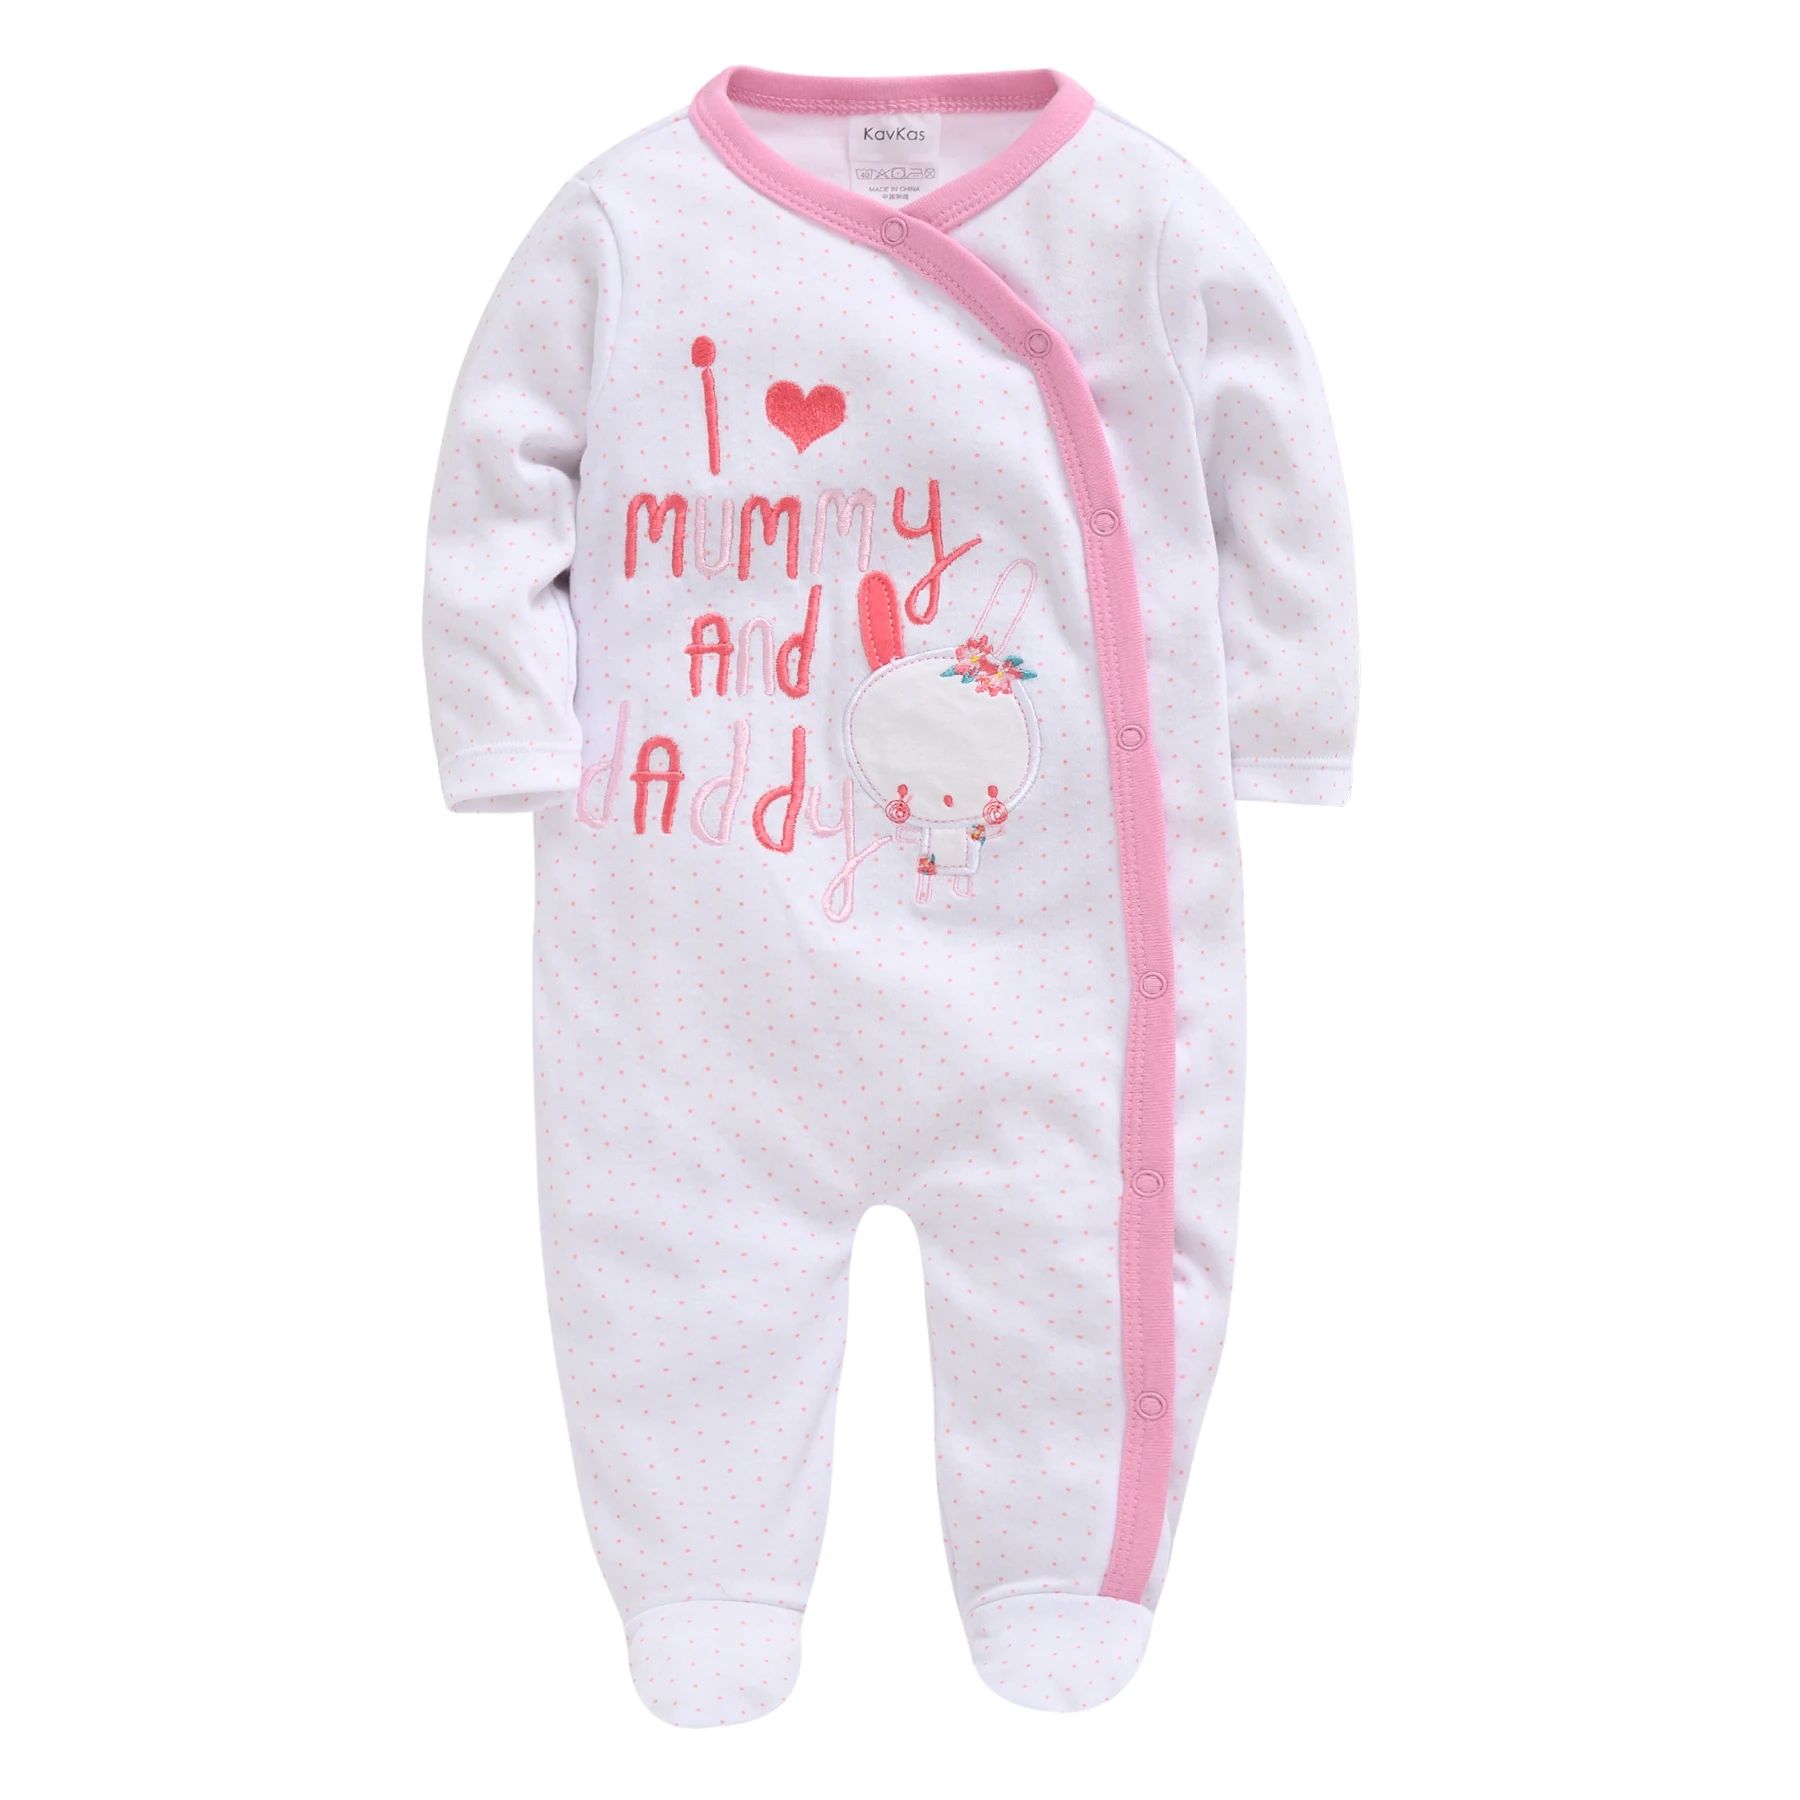 

2019 0-12M Newborn Baby Girl Clothes Cute Cartoon Printed Infant Baby Rompers Jumpsuit Fashion New Toddler Baby Outfits Clothes